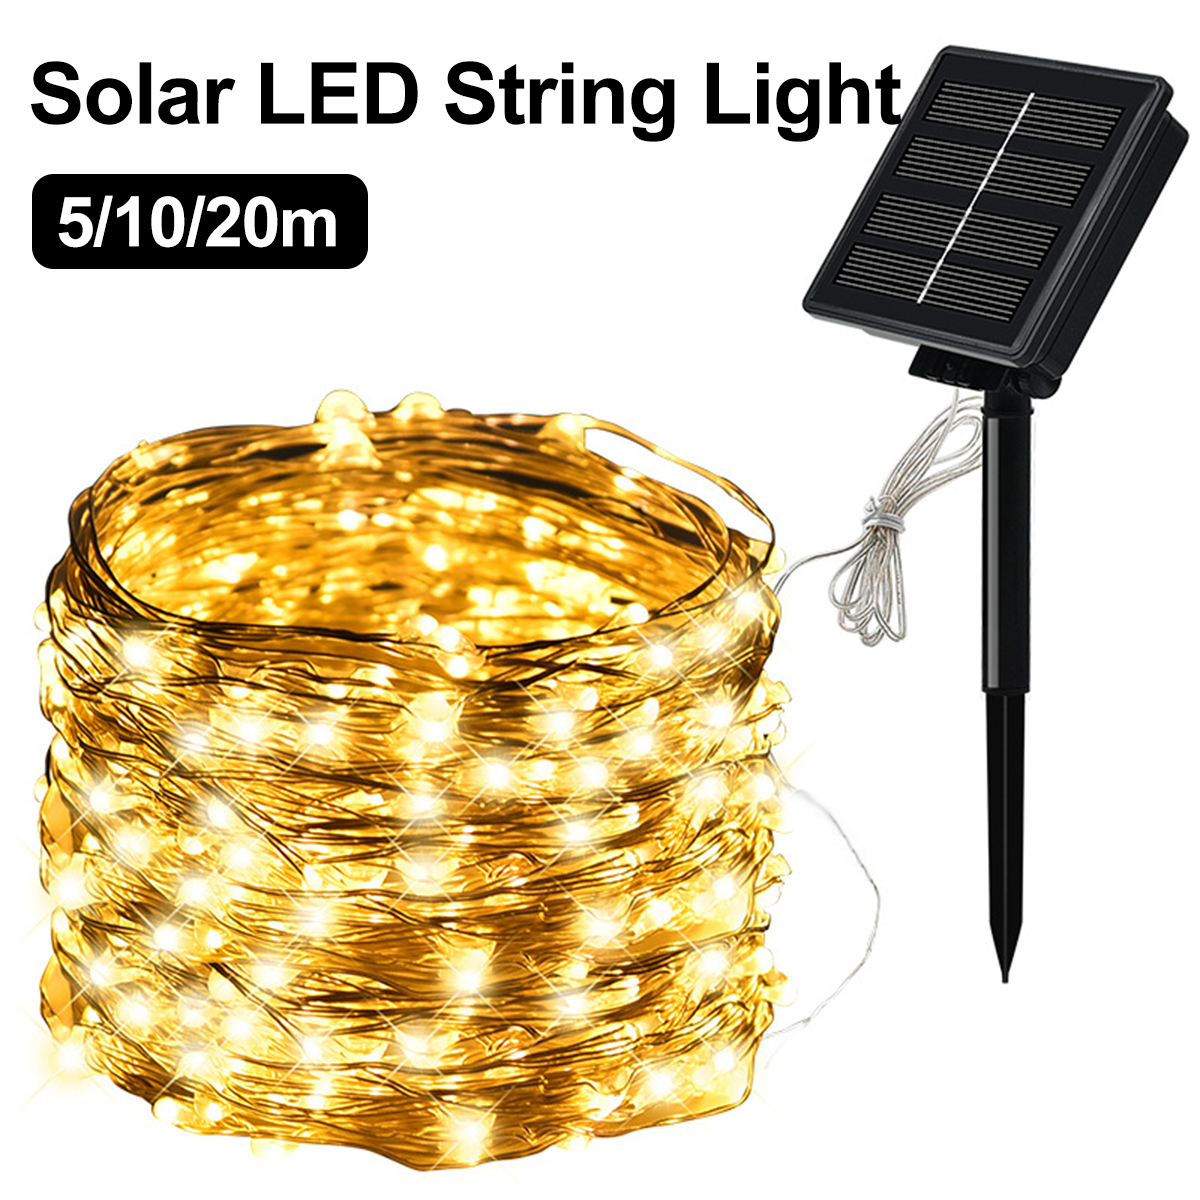 5M10M20M-Solar-Powered-LED-String-Lights-8-Modes-Waterproof-Outdoor-Garden-Home-Decoration-1743221-1